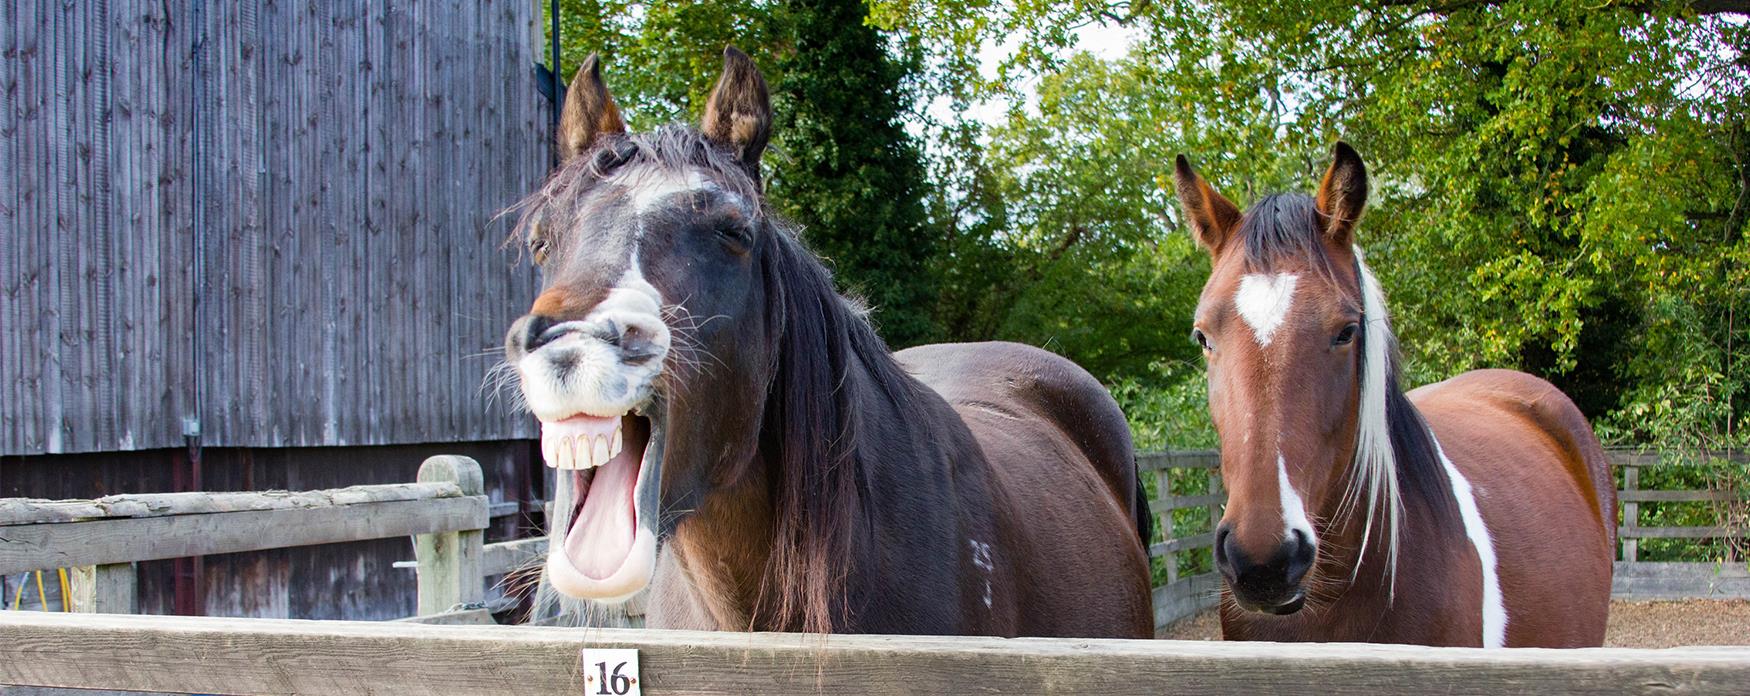 2 horses, one laughing